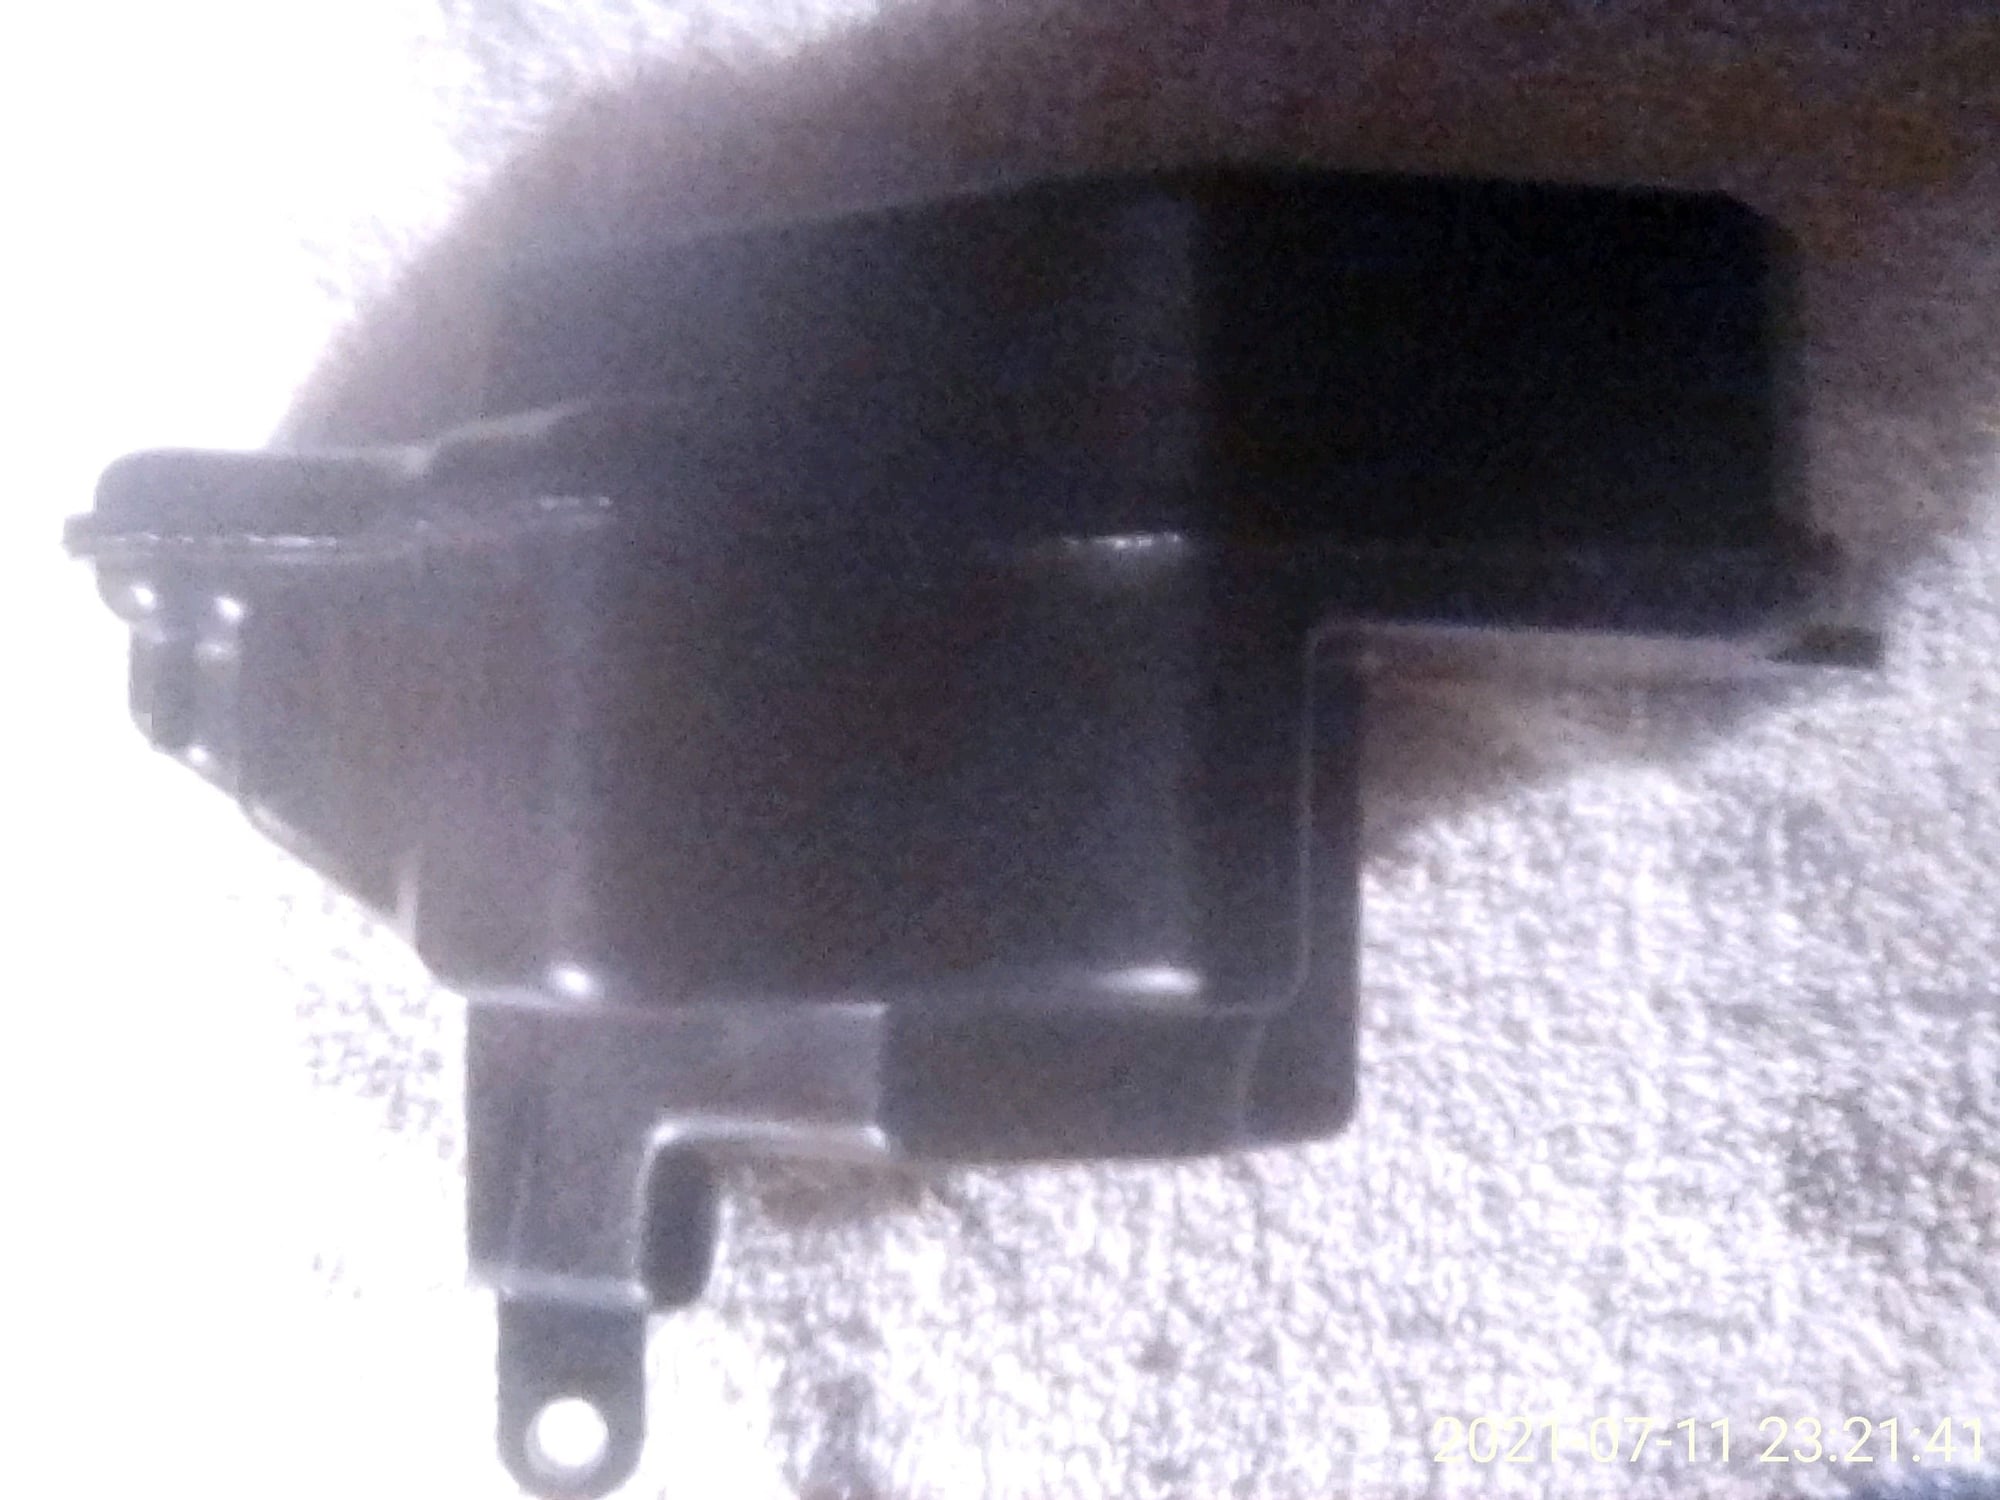 Miscellaneous - FD - OEM Vacuum Chamber Tank - Used - 1991 to 1994 Mazda RX-7 - San Jose, CA 95121, United States